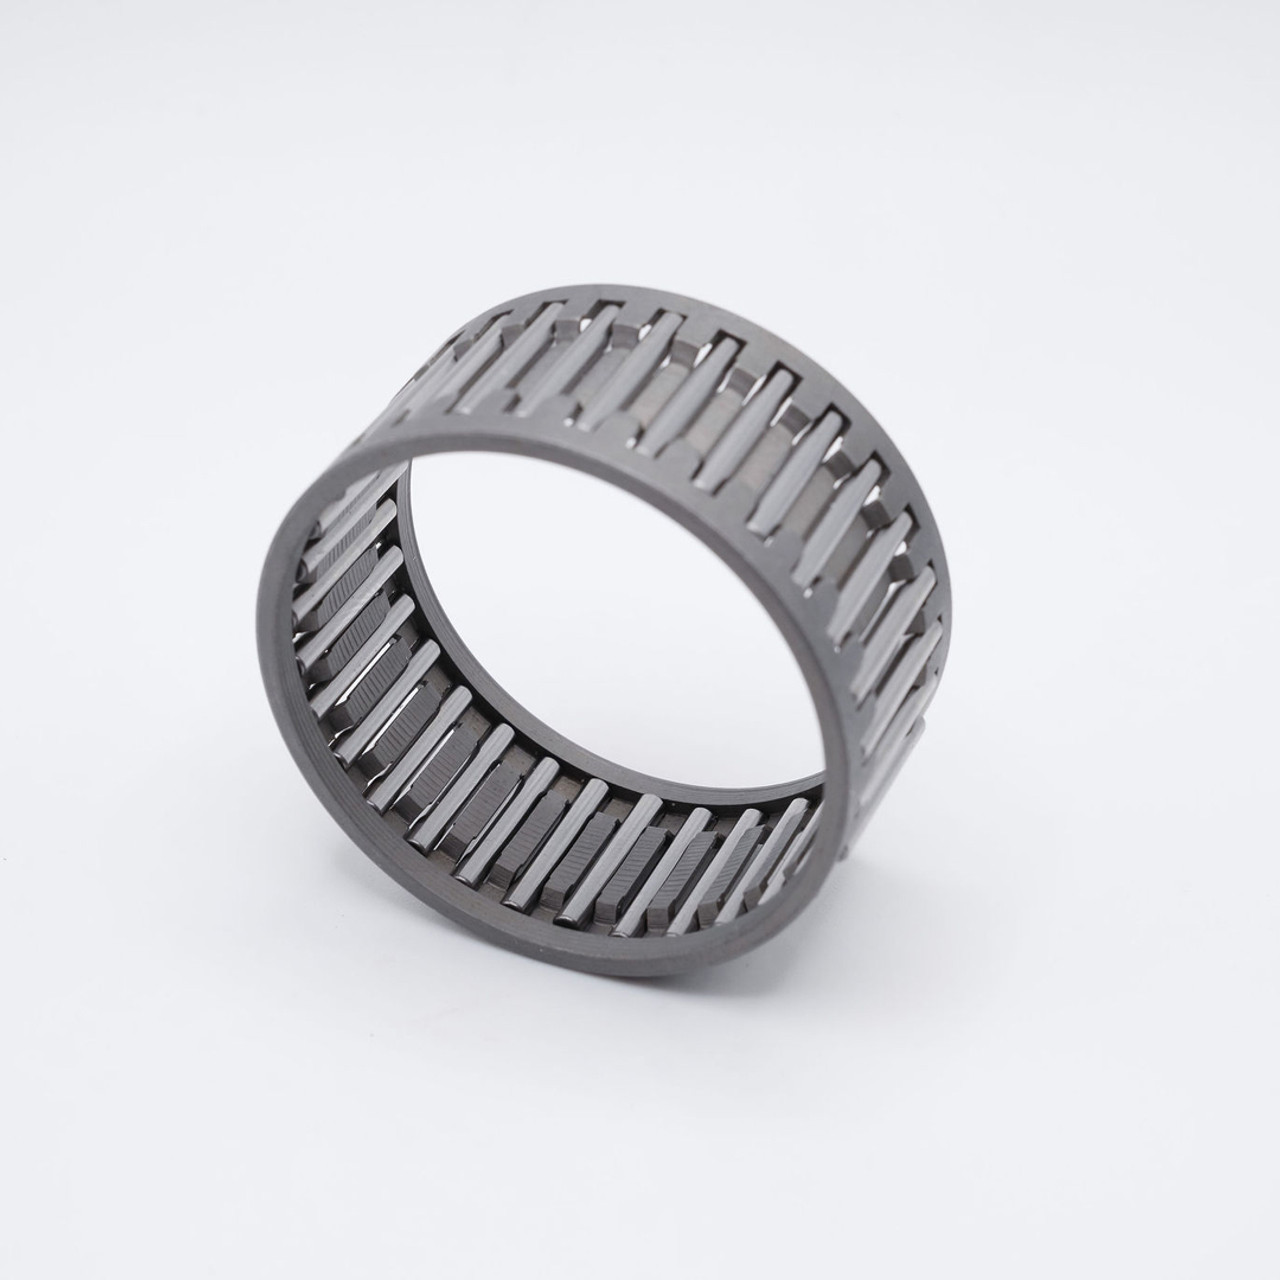 KT182522 Needle Roller Bearing 18x25x22mm Angled View